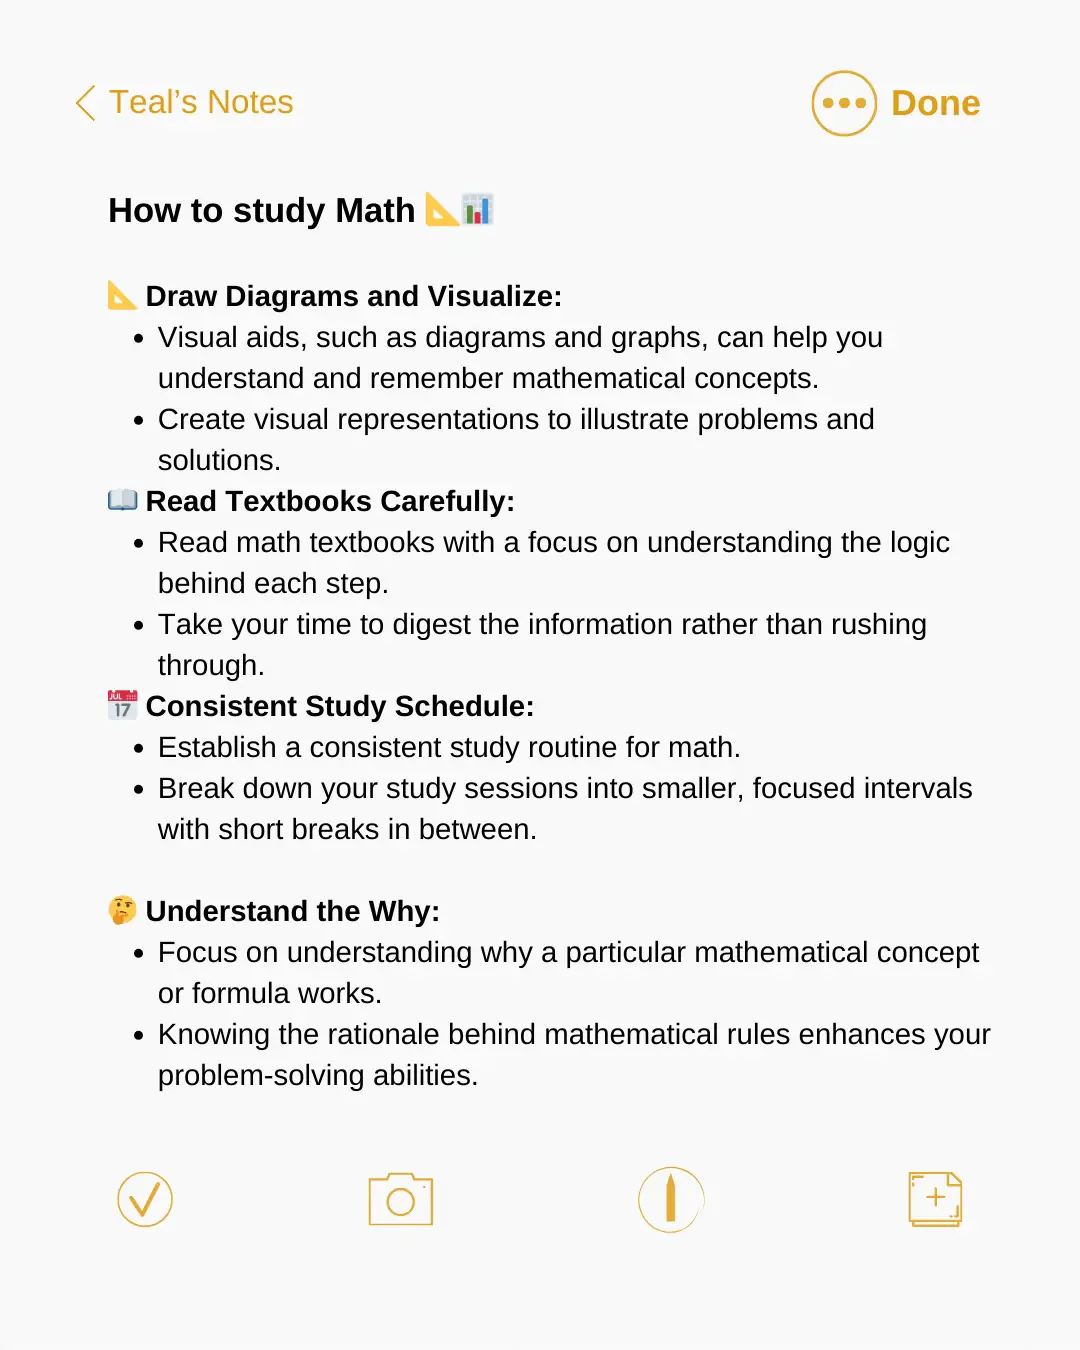  A list of study notes for math.